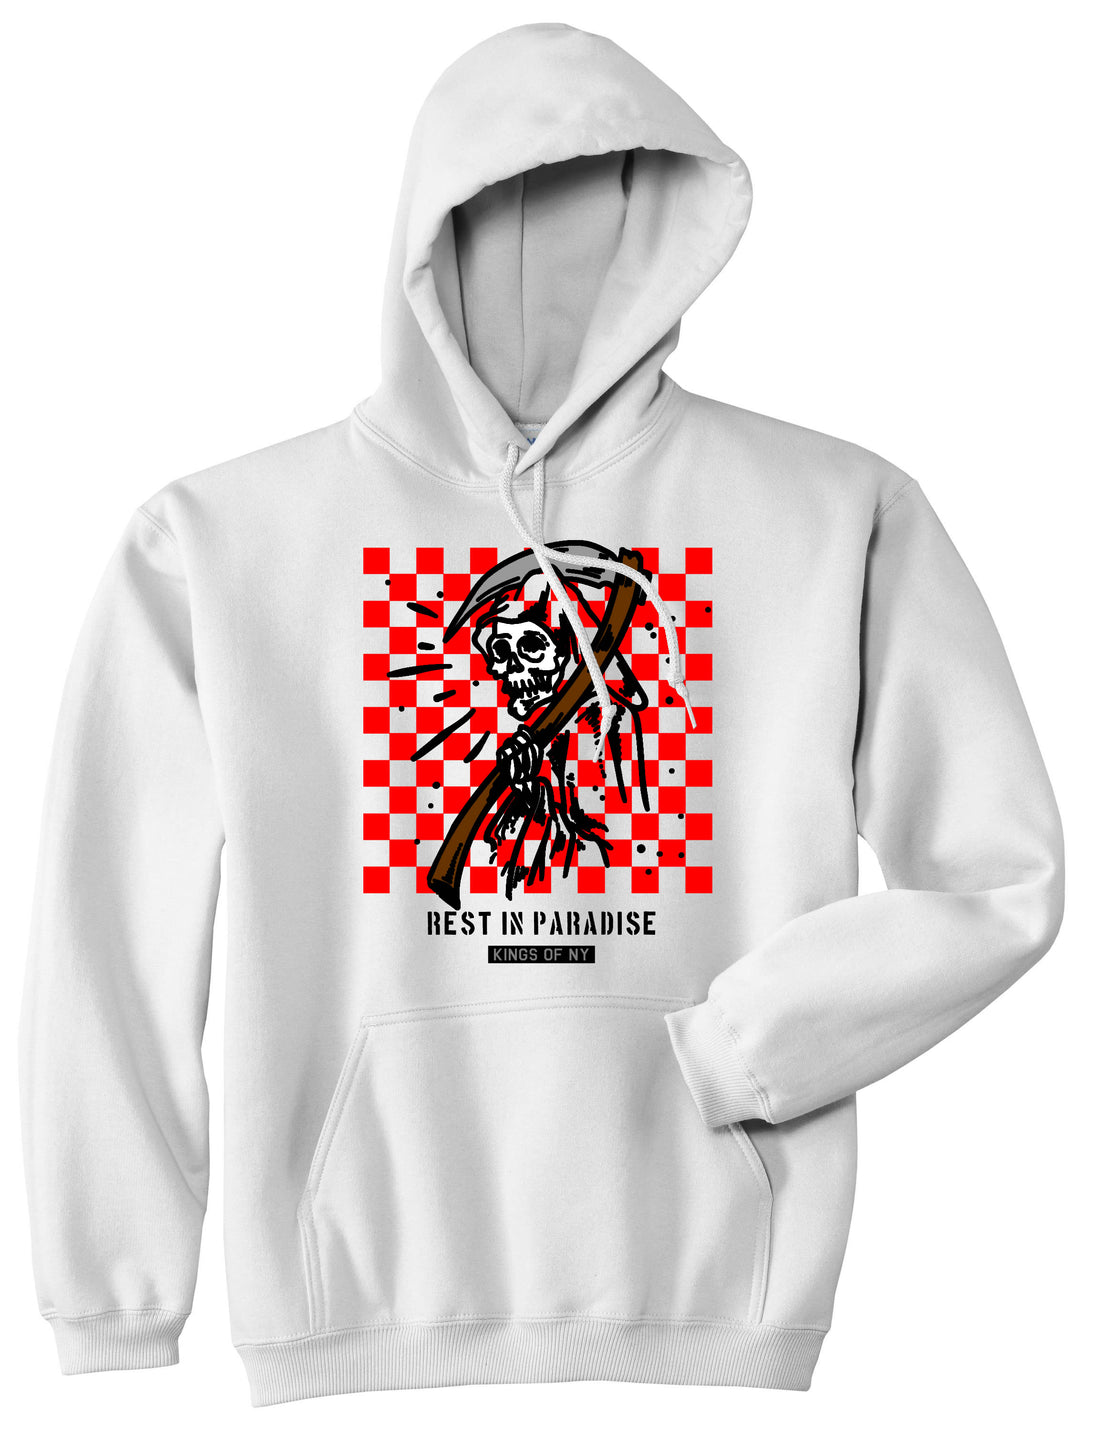 Rest In Paradise Grim Reaper Mens Pullover Hoodie White By Kings Of NY